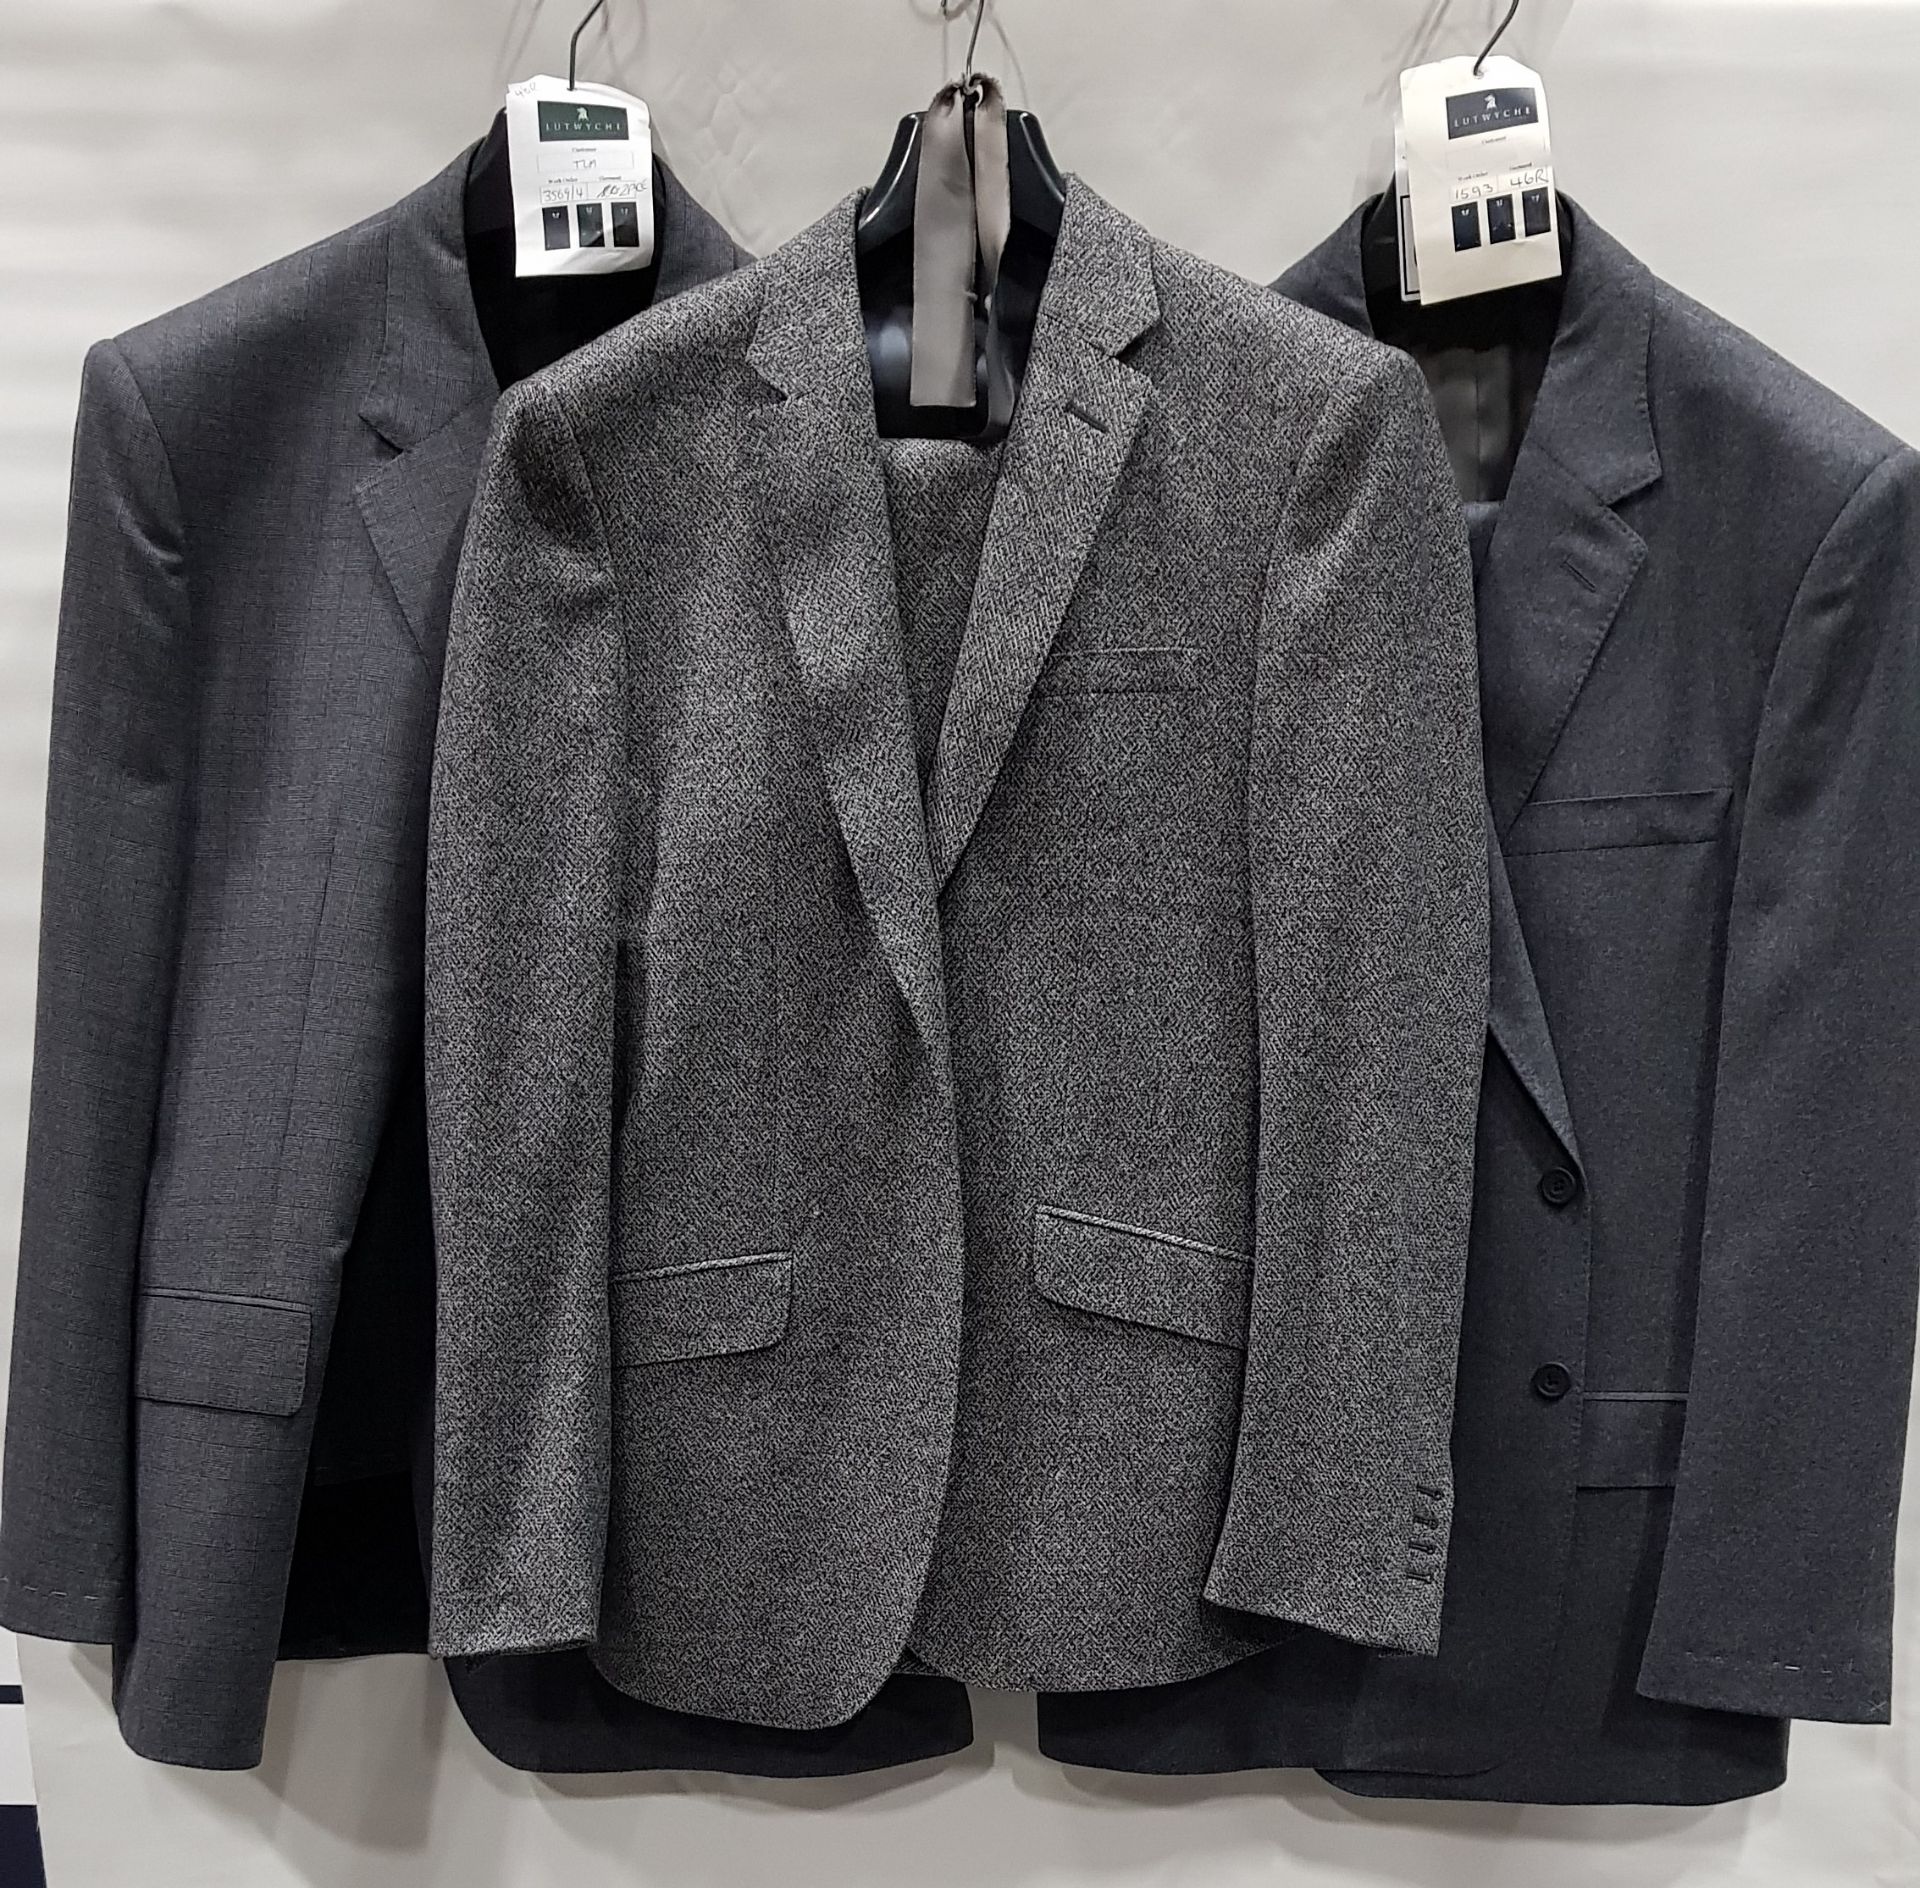 3 X BRAND NEW LUTWYCHE 2 PC GREY SHADES MATCHING SUITS SIZES 46R, 48R, 38R (NOTE NOT FULLY